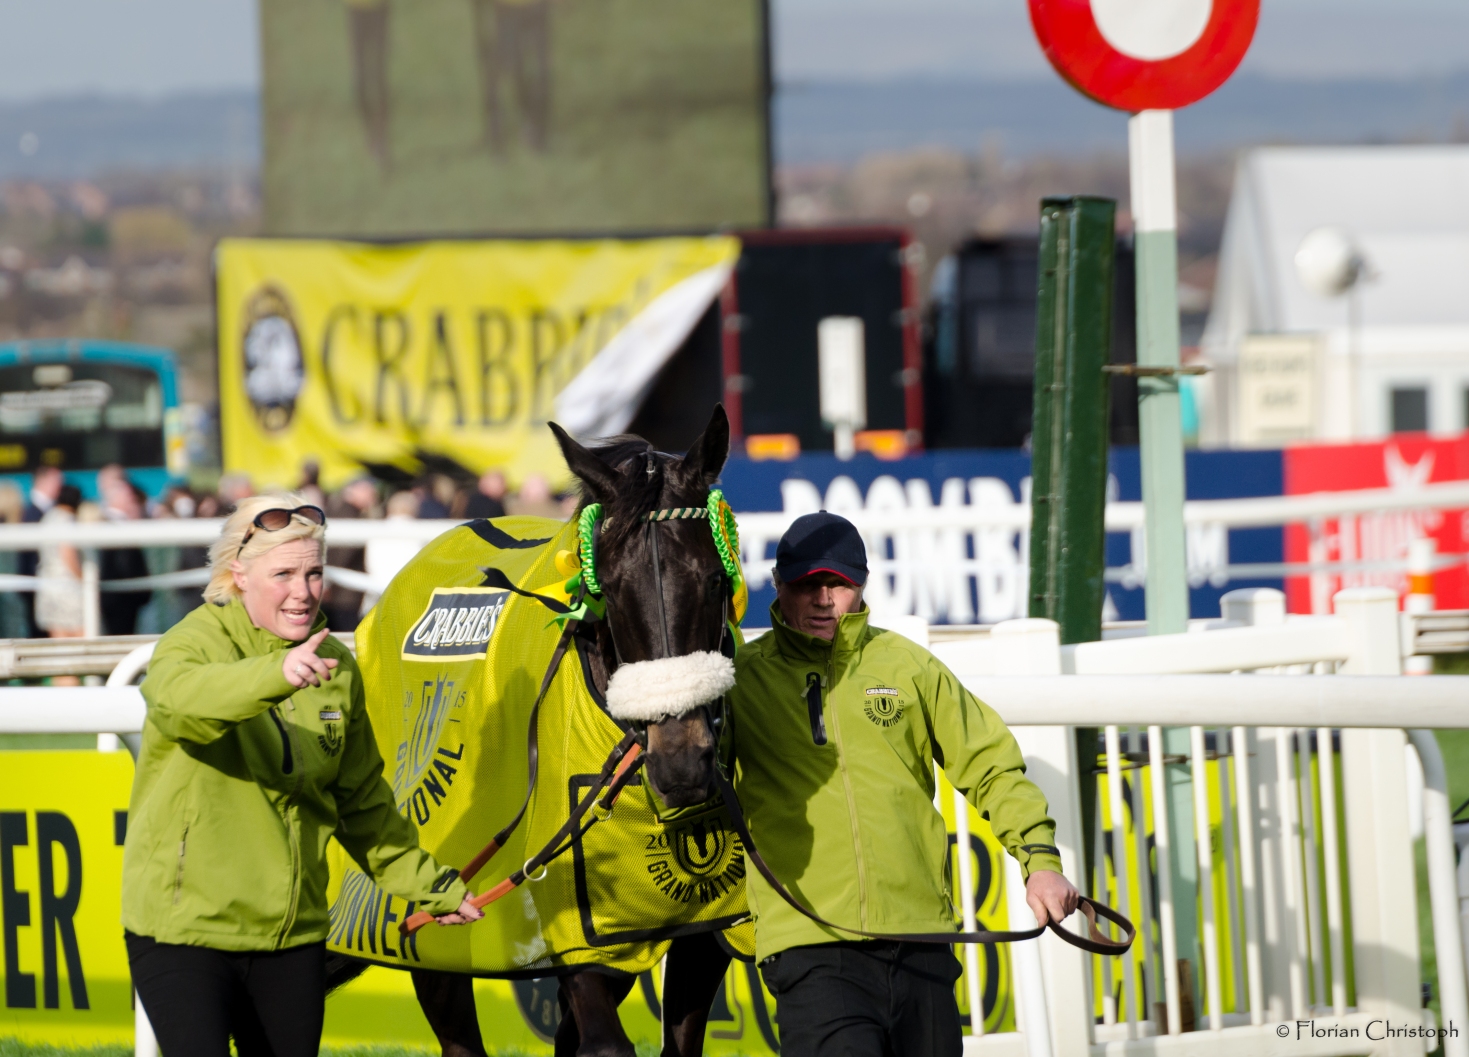 Grand National winner Many Clouds